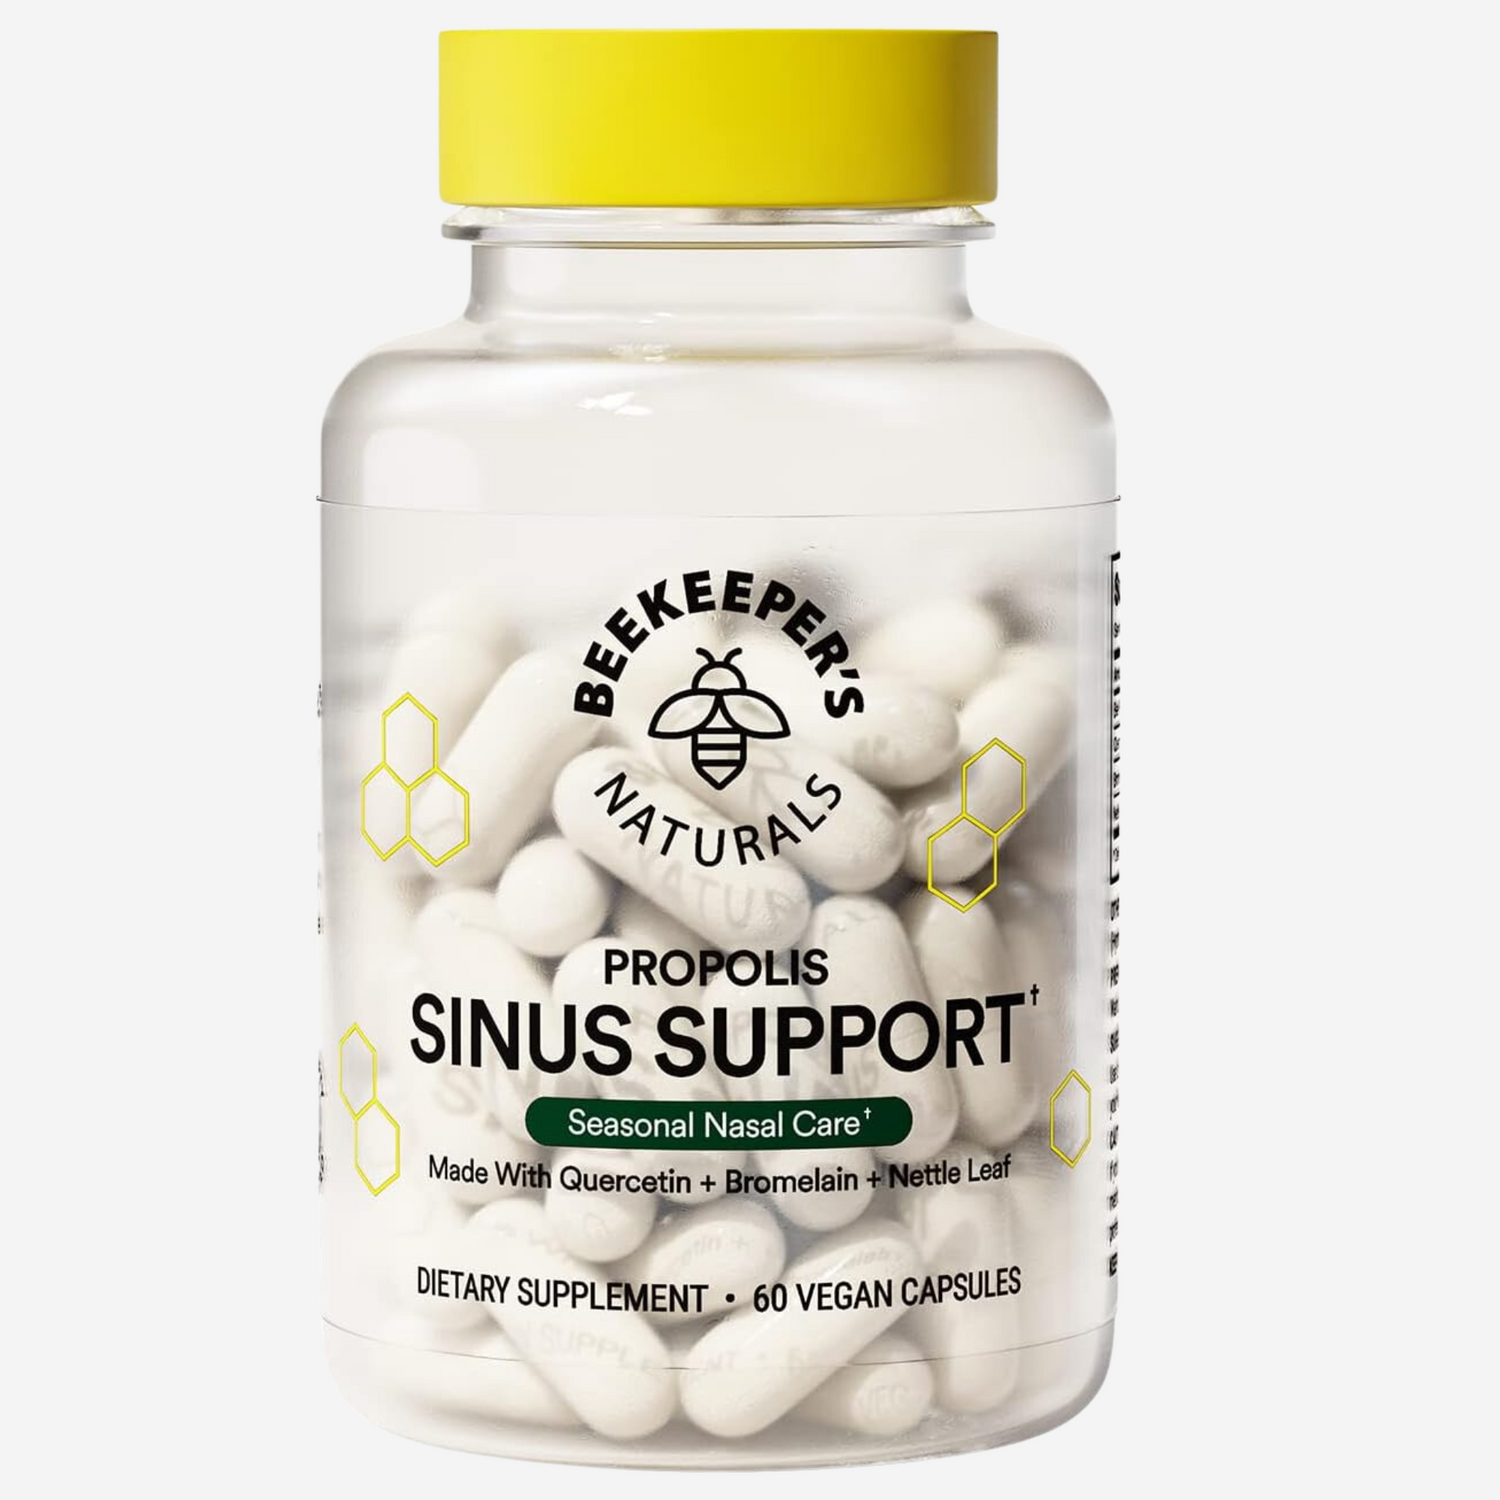 Beekeeper's Naturals All Natural Sinus Support for Adults, Seasonal Nasal Care Relief with Propolis